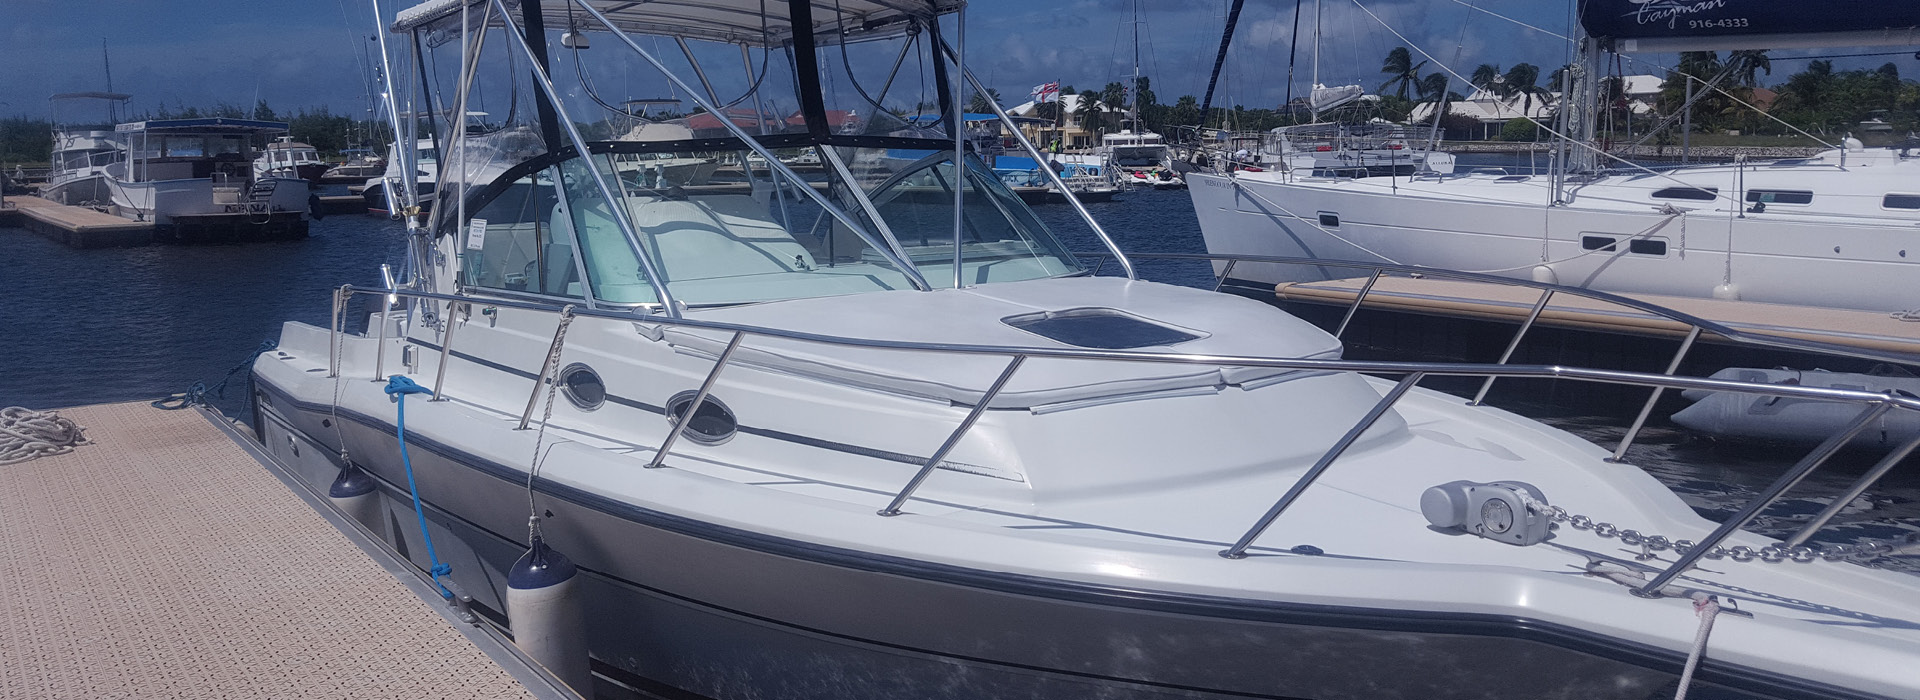 Cayman Boat Charters